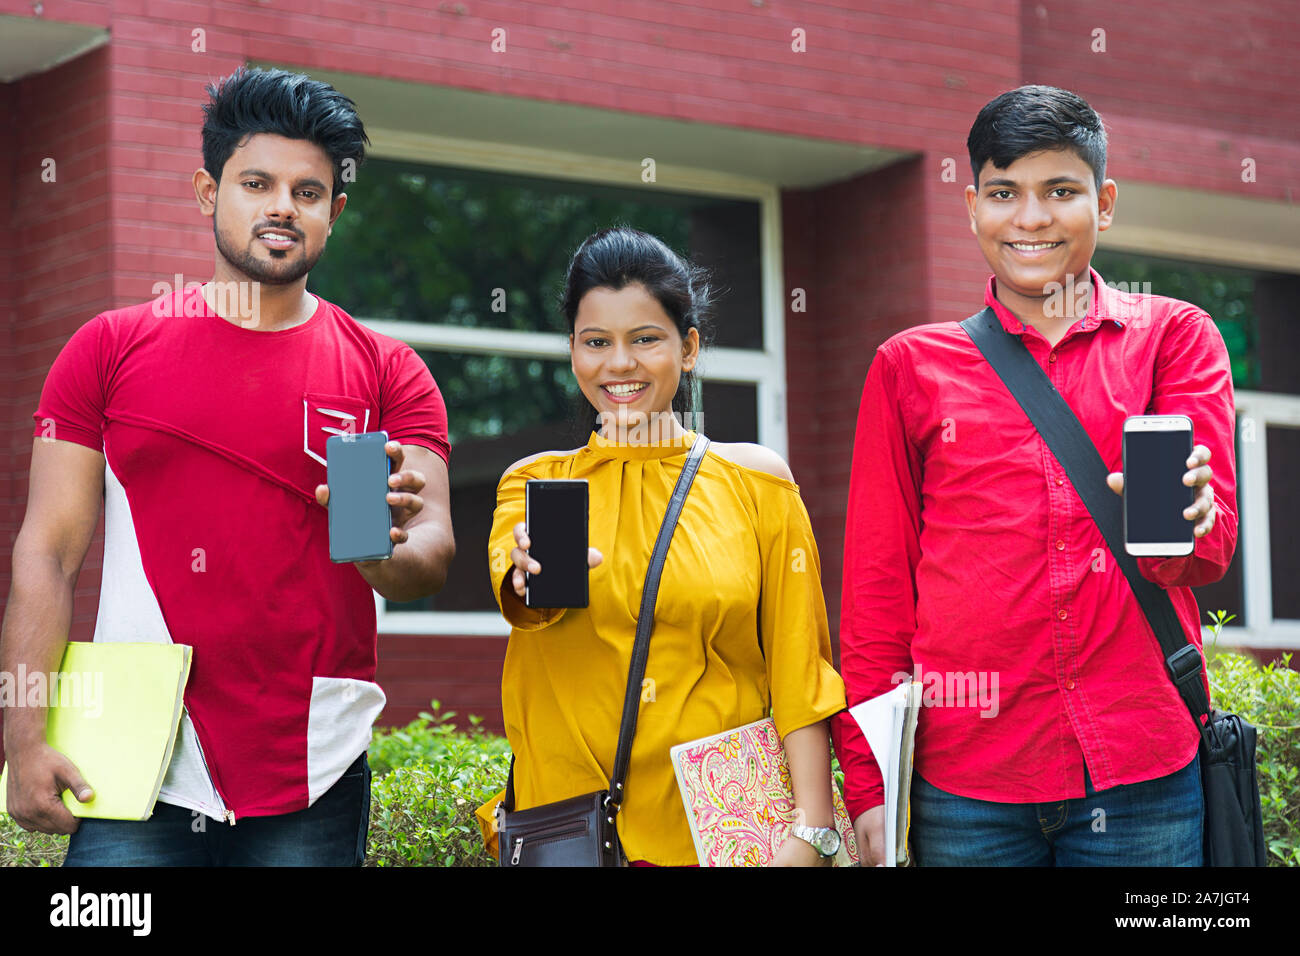 College University Students Classmates Together Showing Cell-phone Advance Technology In-Outside Campus Building Stock Photo